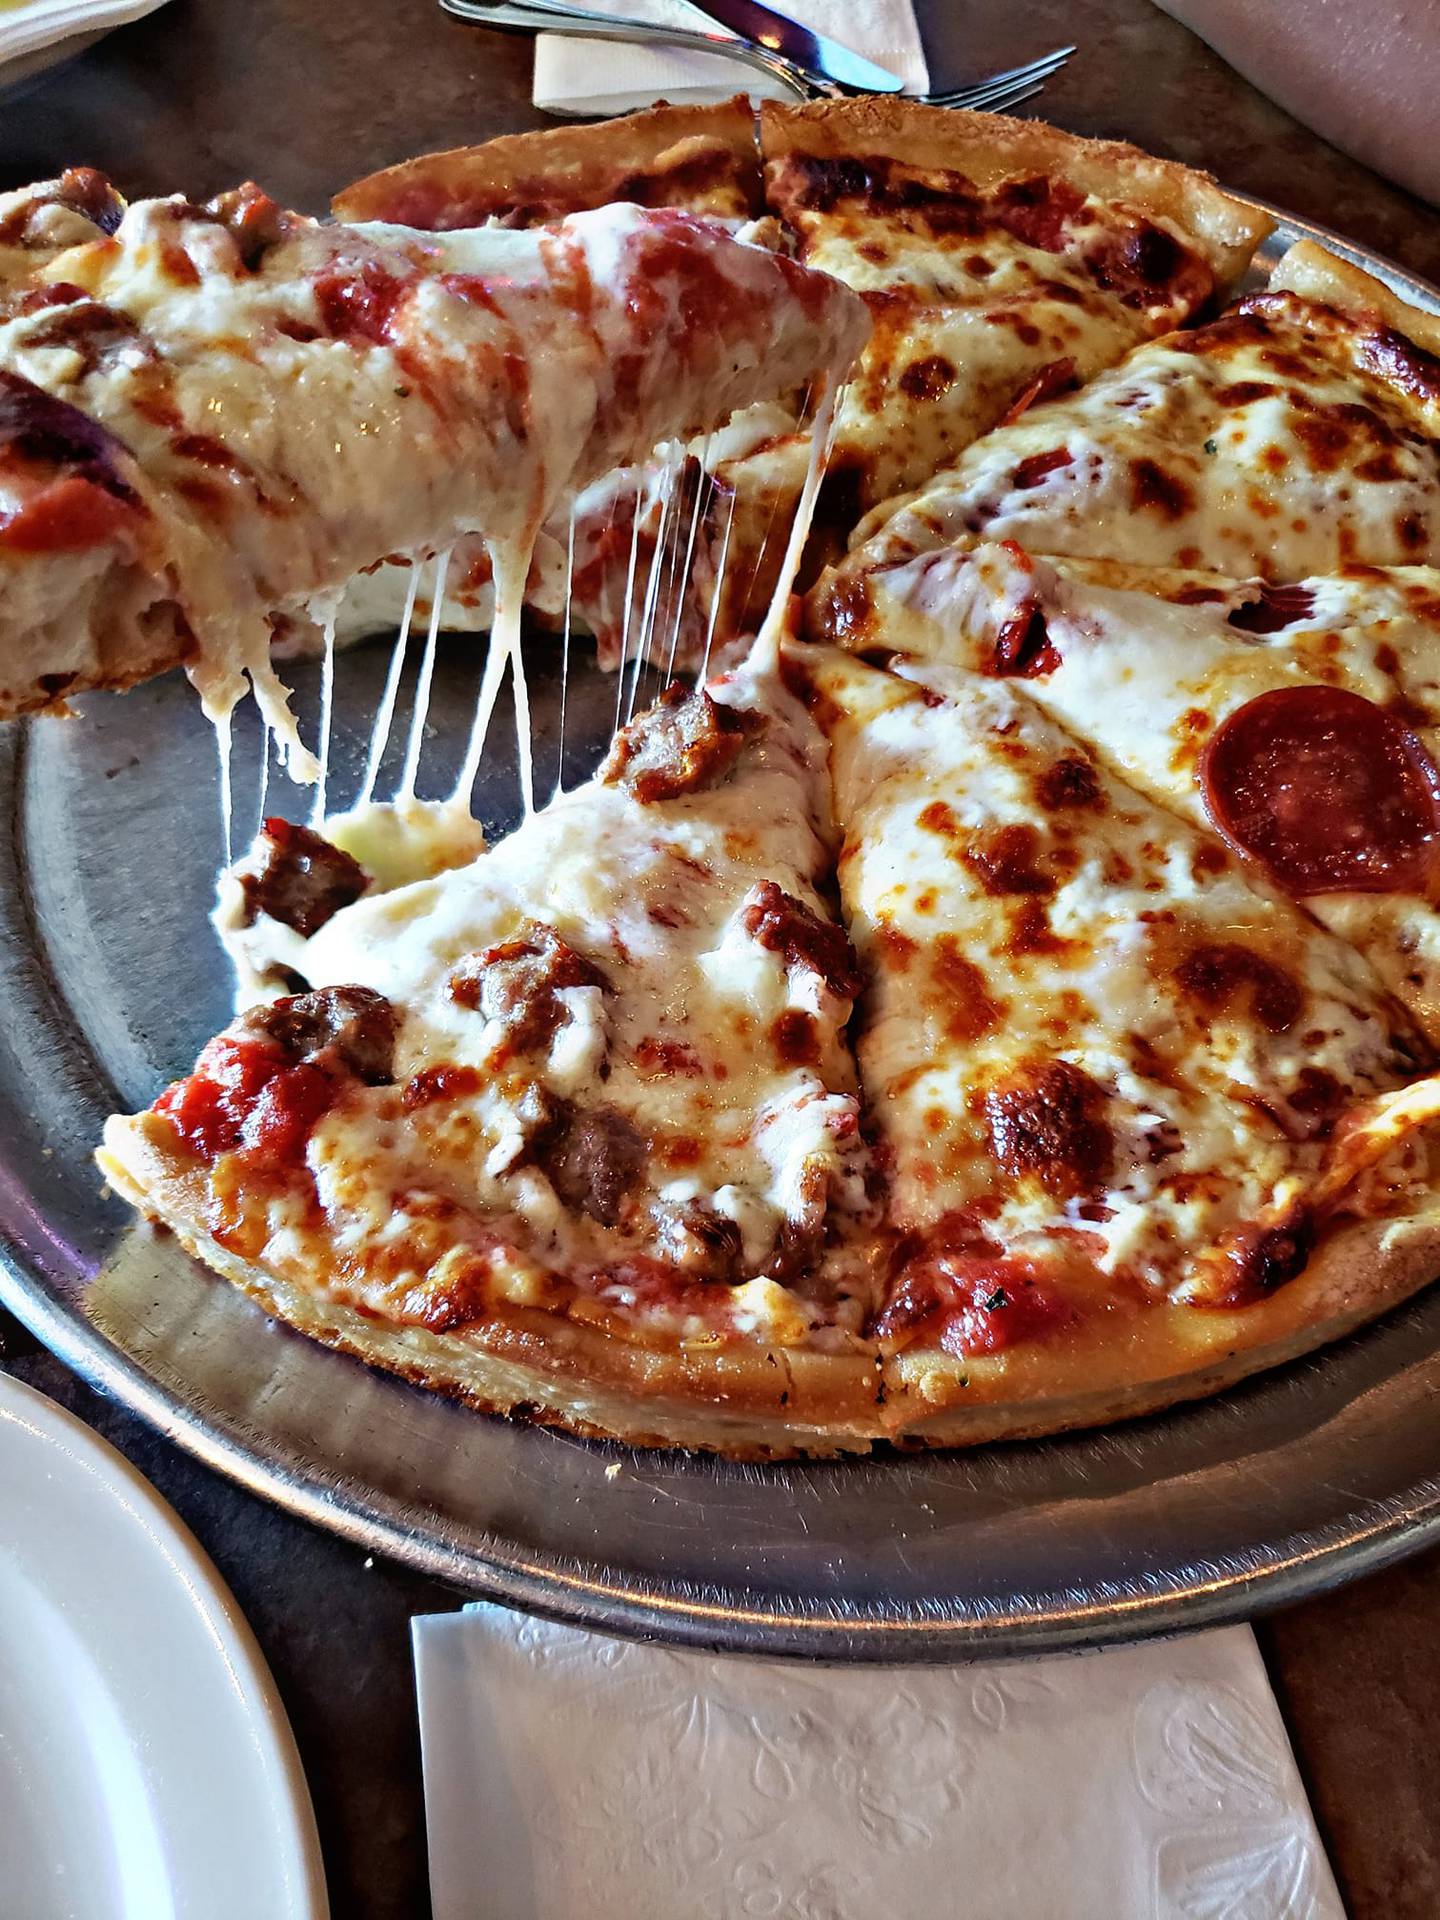 Armand's Pizzeria in Elmhurst was named one of the finest pizza places in DuPage County by readers in 2021. (Photo from Armand's Pizzeria Facebook page)